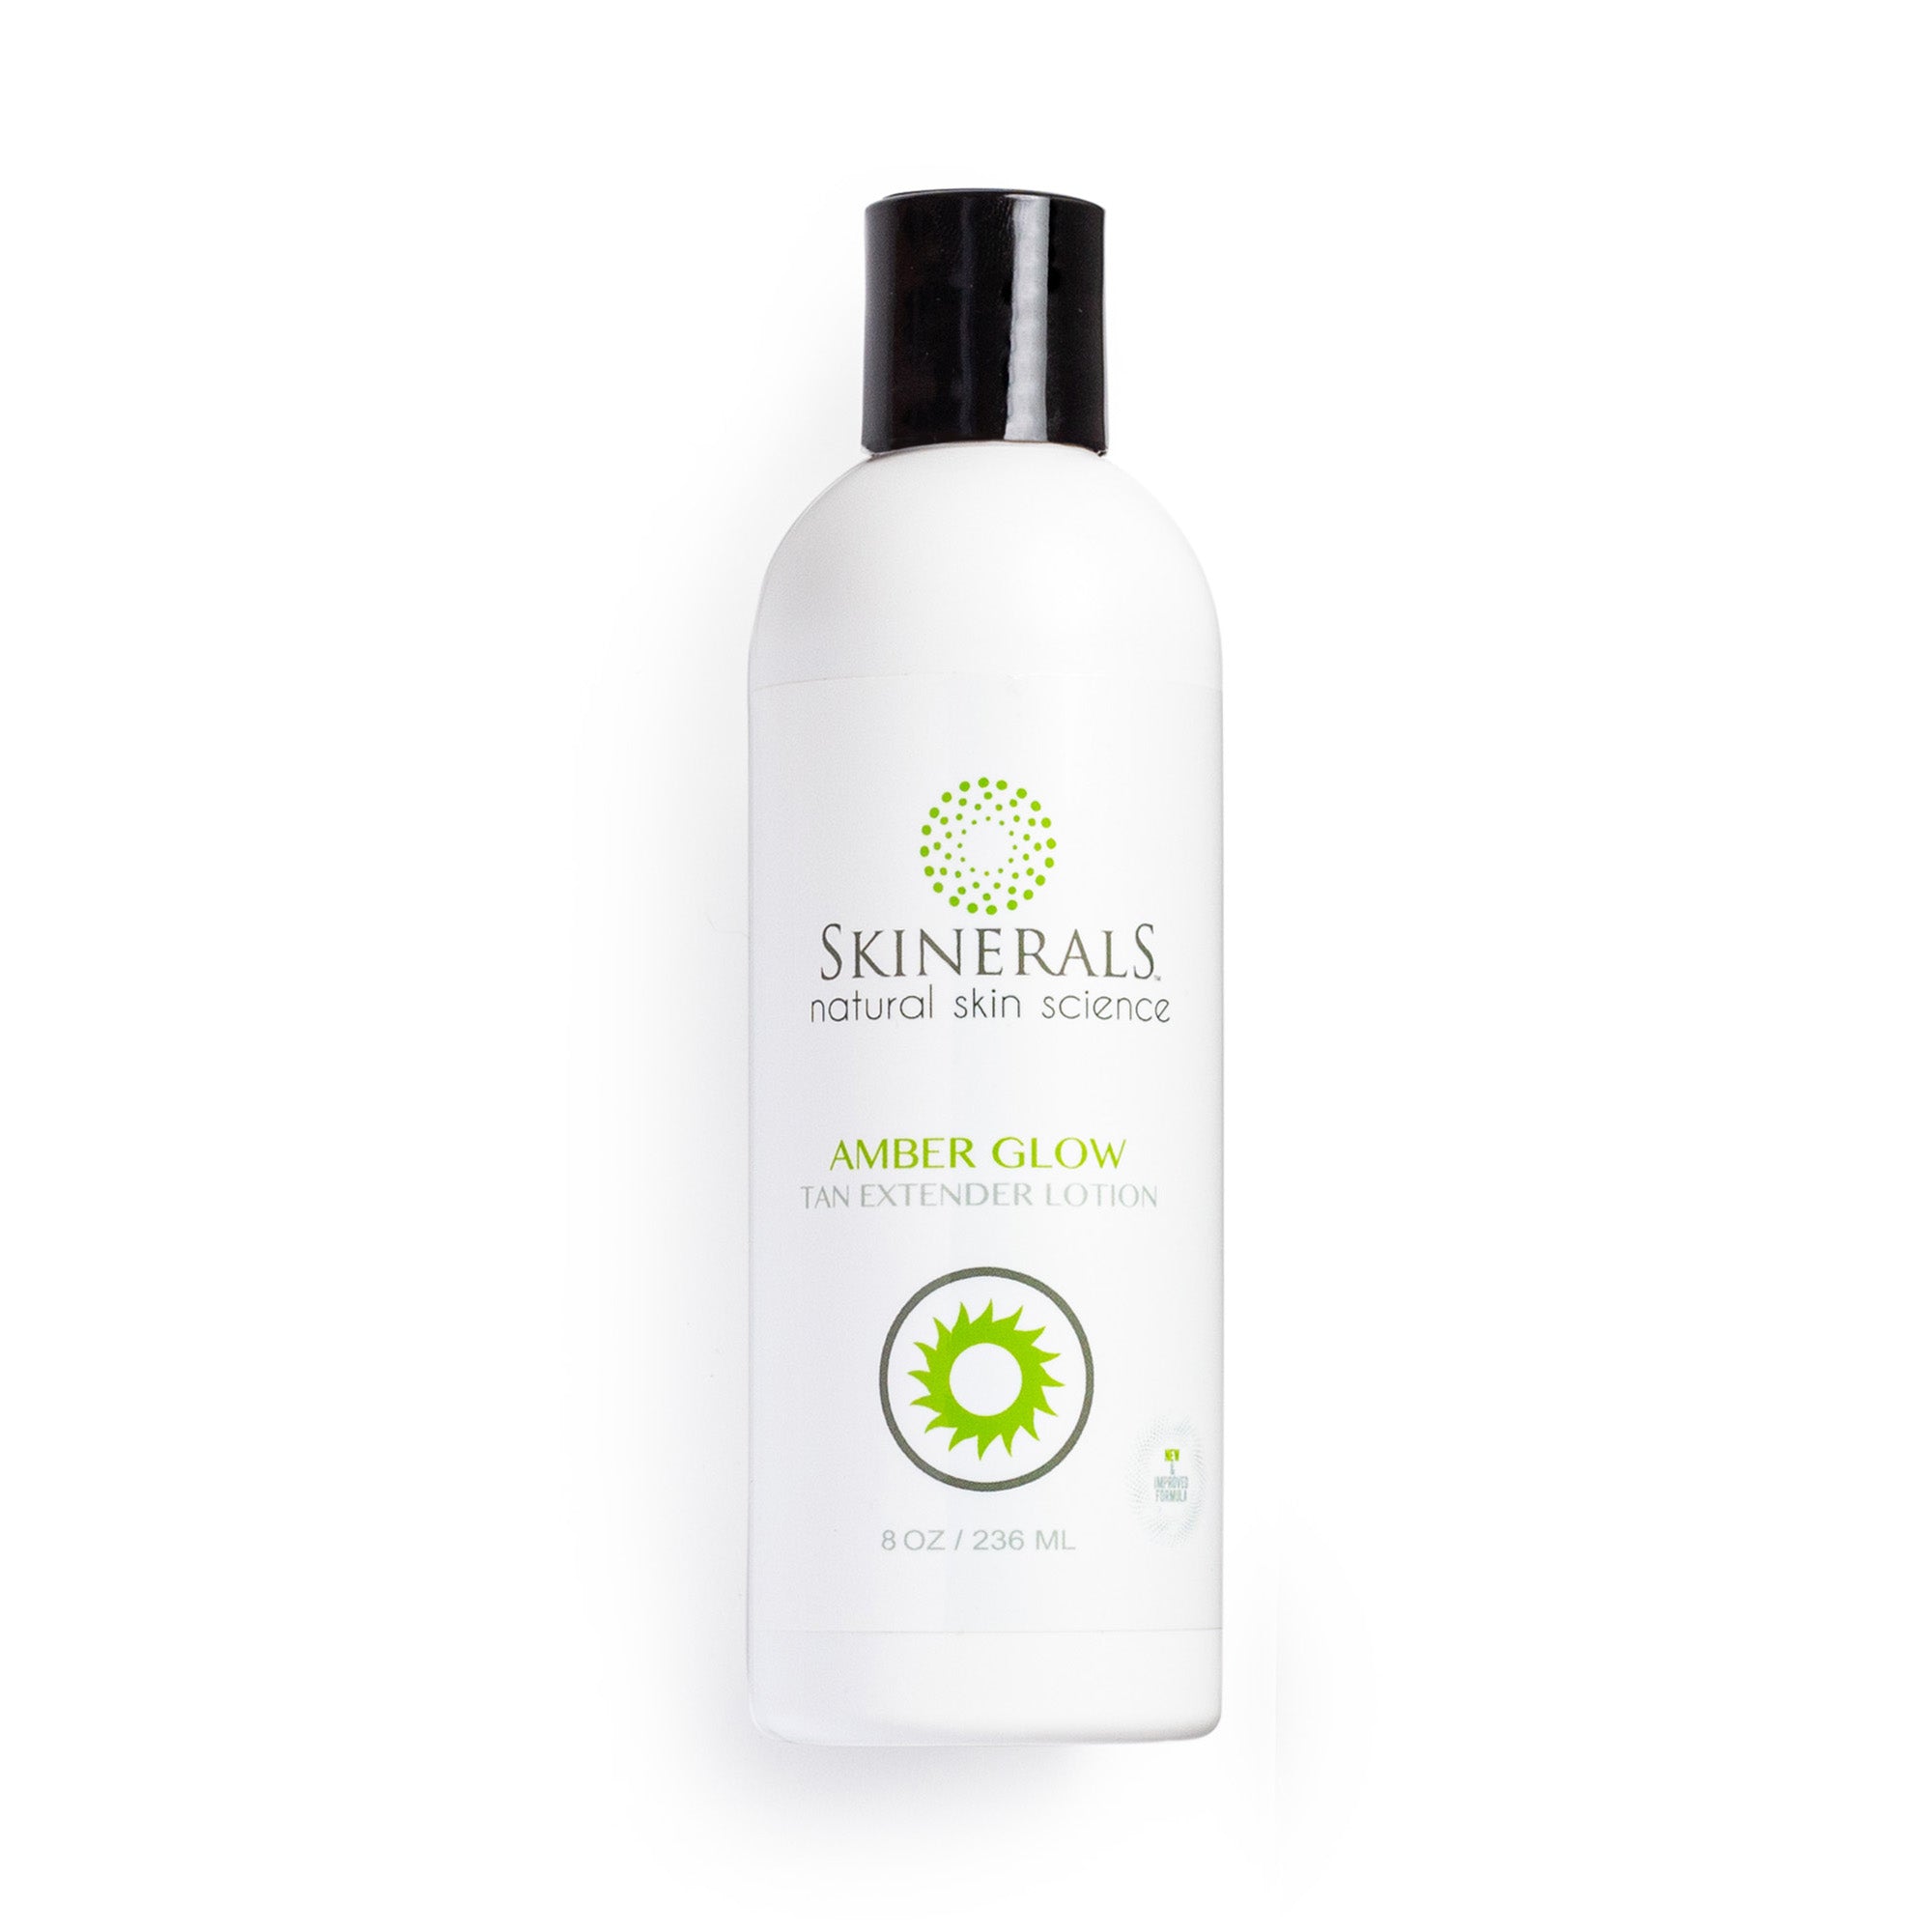 Skinerals Amber Glow Tan Extender Lotion``